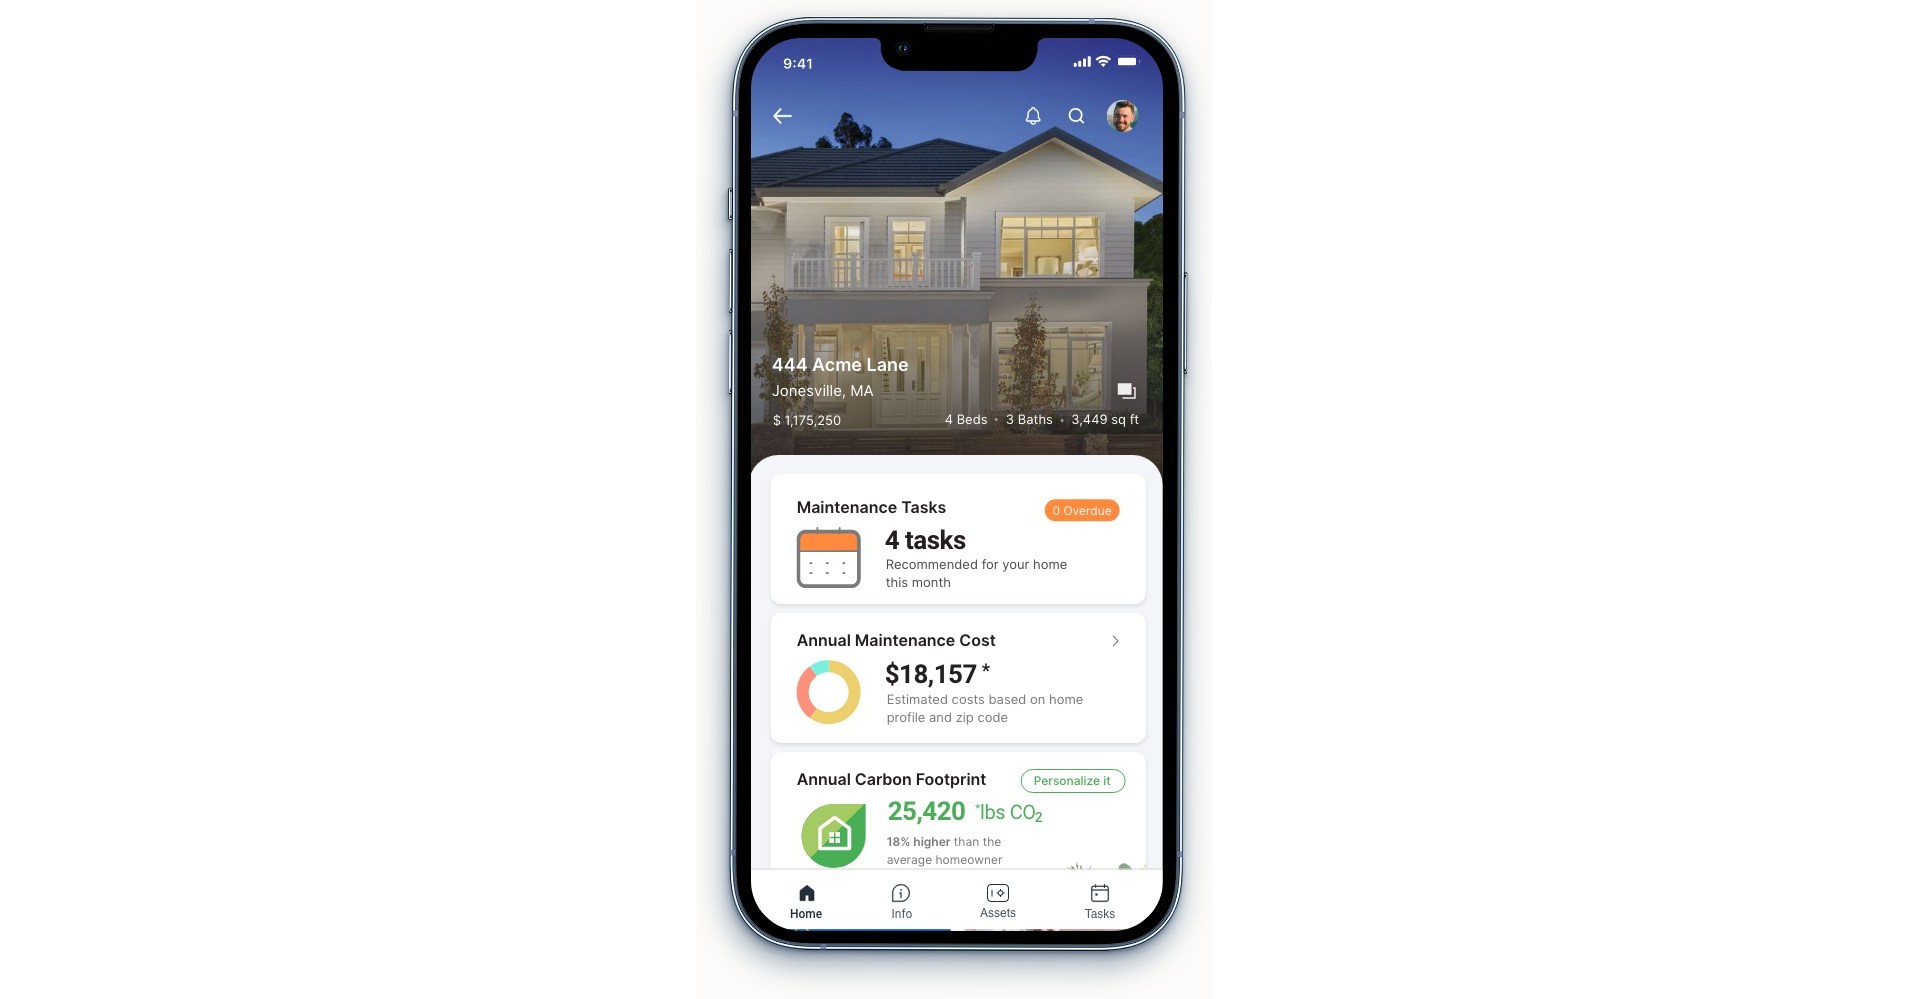 Dwellin Shows Homeowners Annual Home Maintenance Costs and Carbon Footprint in One, Easy-to-use Mobile App